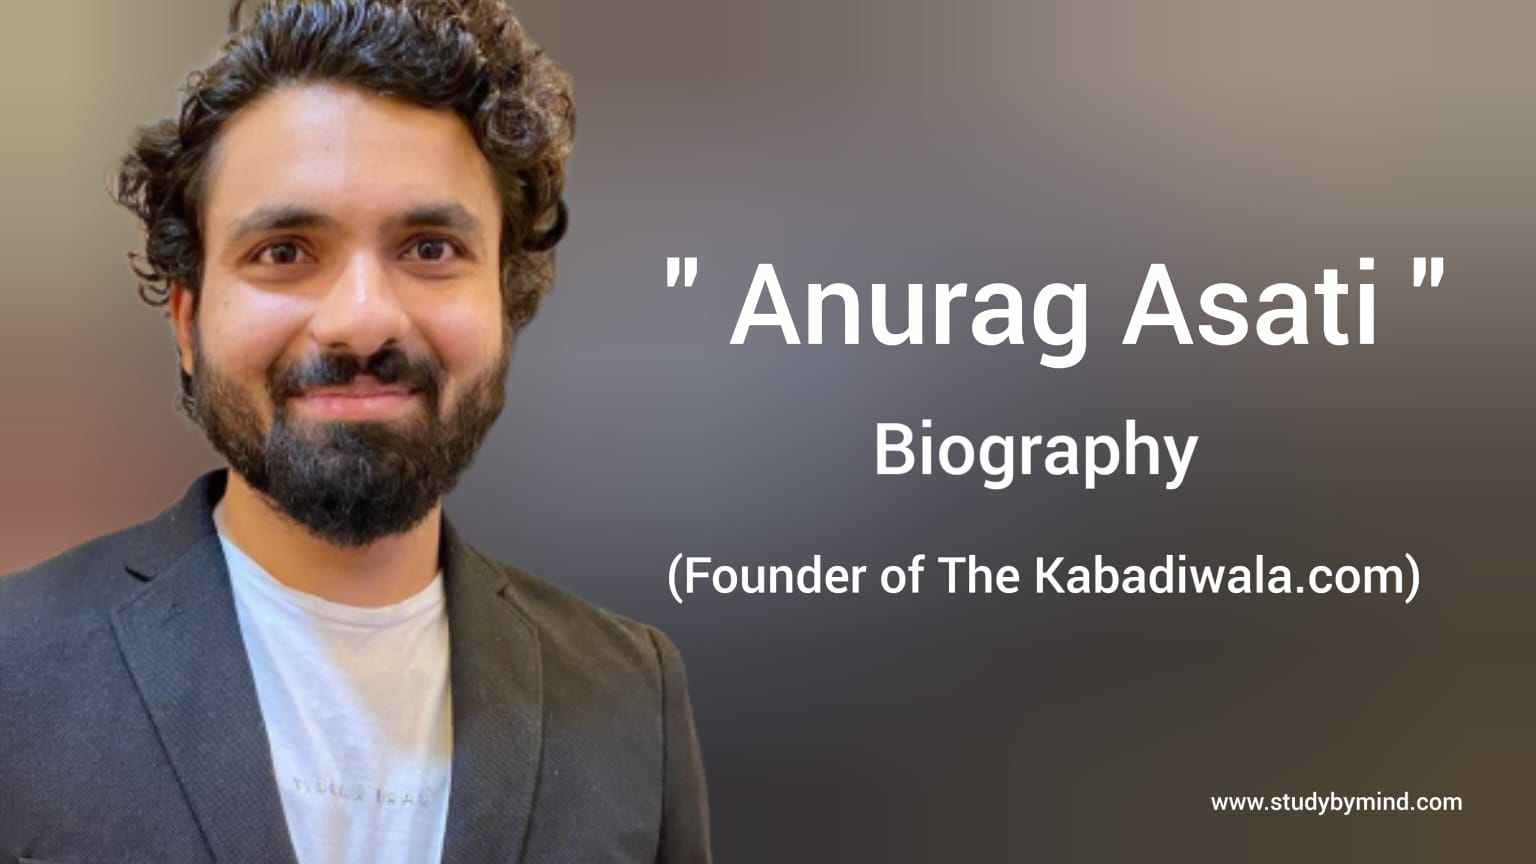 You are currently viewing Anurag Asati biography in english (co-founder of The Kabadiwala.com)